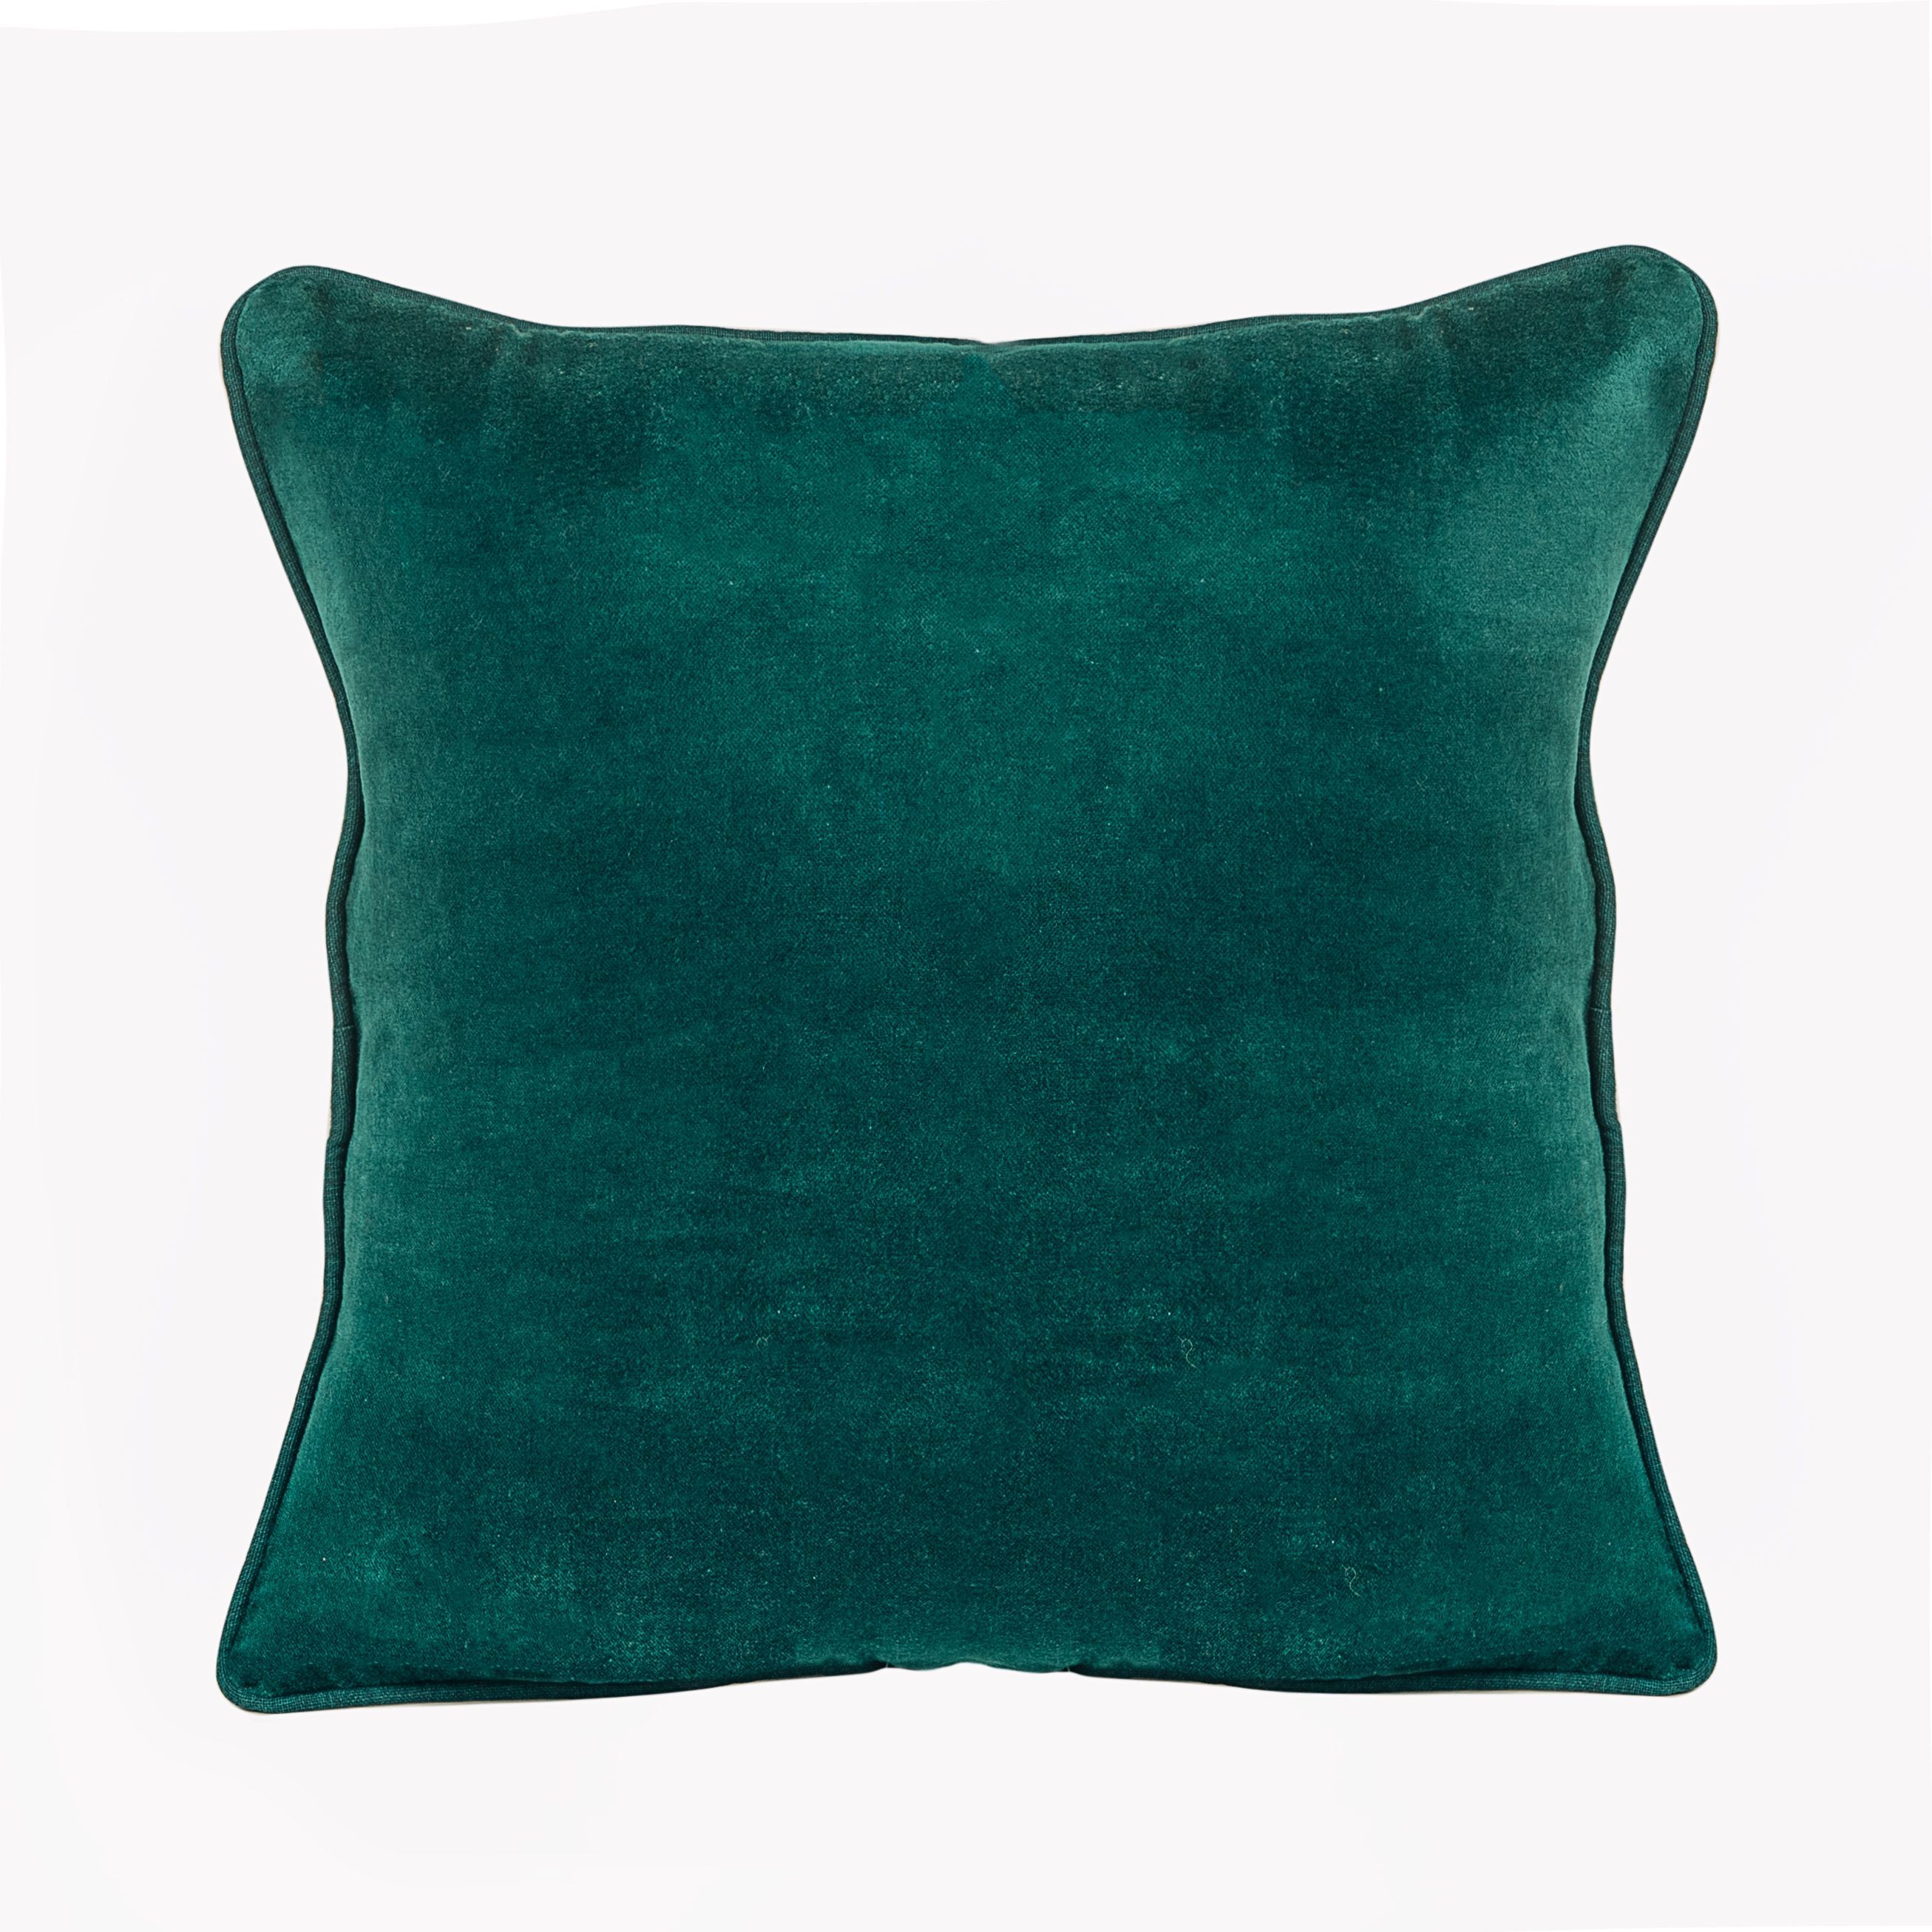 CUSHION PETROL VELVET WITH PIPING 40X40